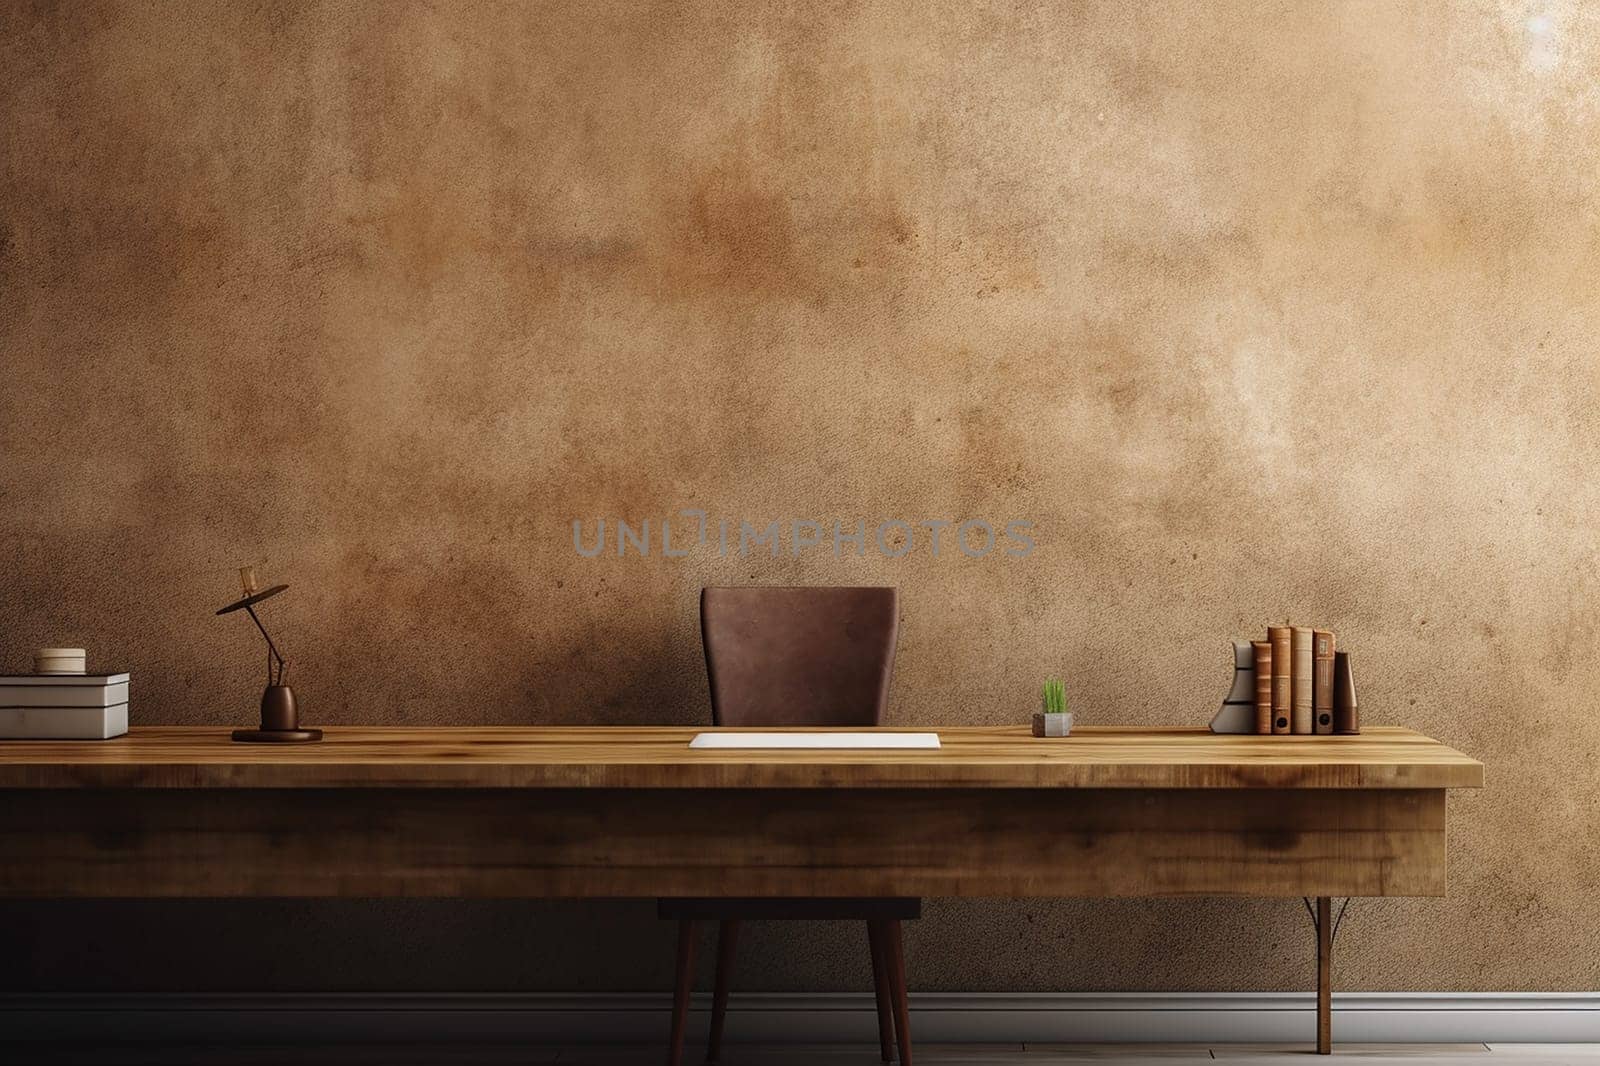 Minimalist workspace with wooden desk, laptop, and decorative items by Hype2art